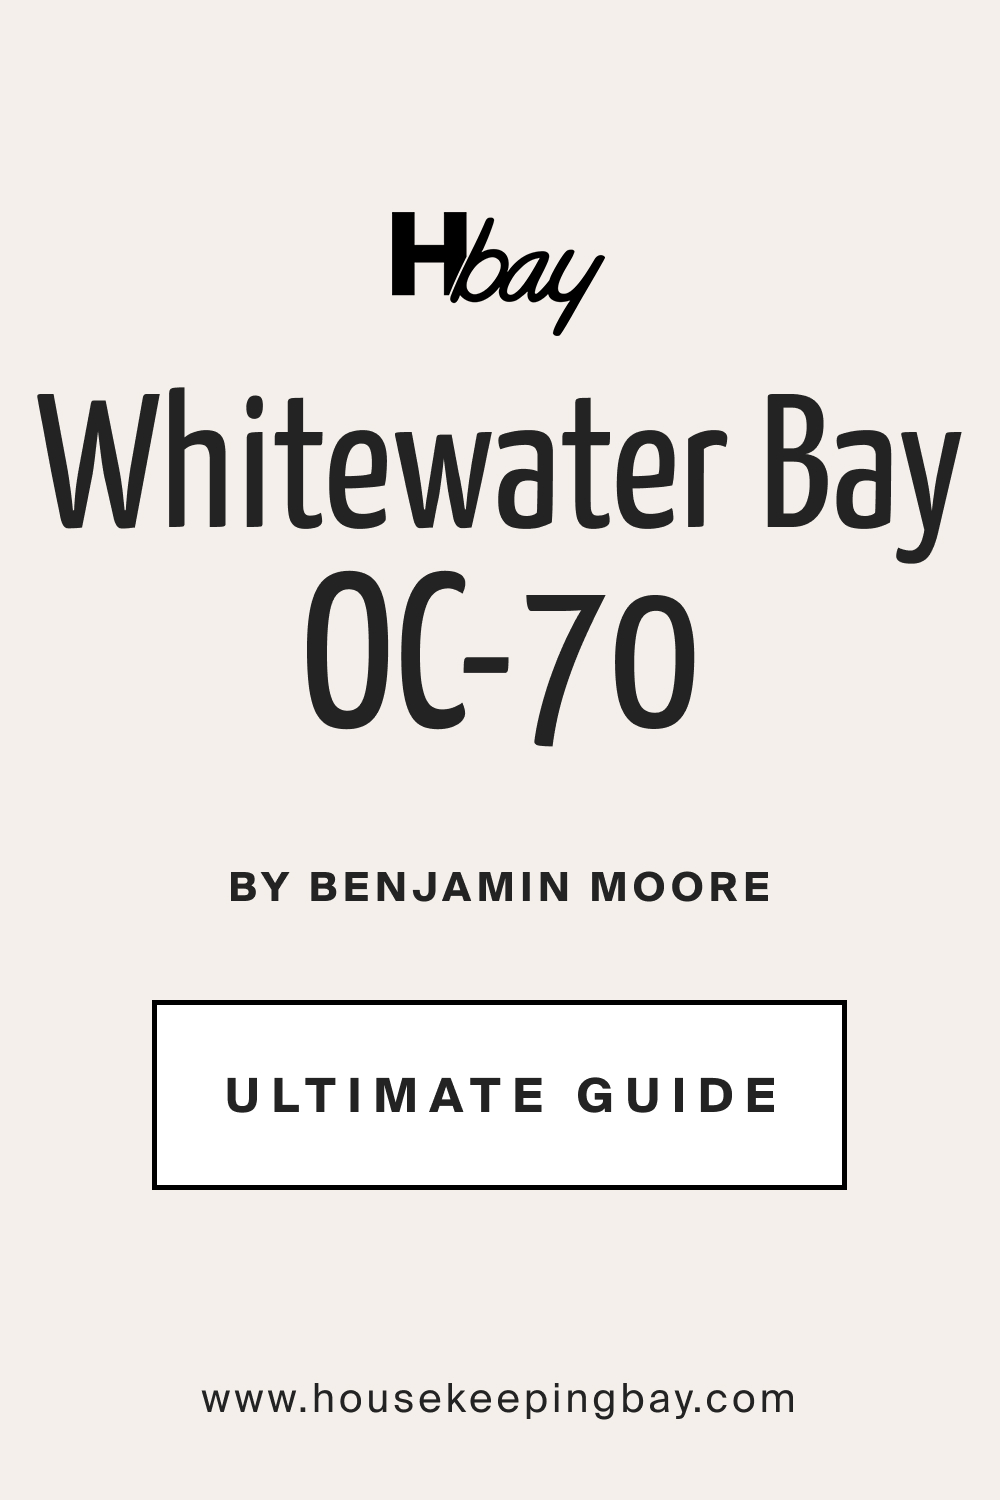 Whitewater Bay OC 70 by Benjamin Moore Ultimate Guide